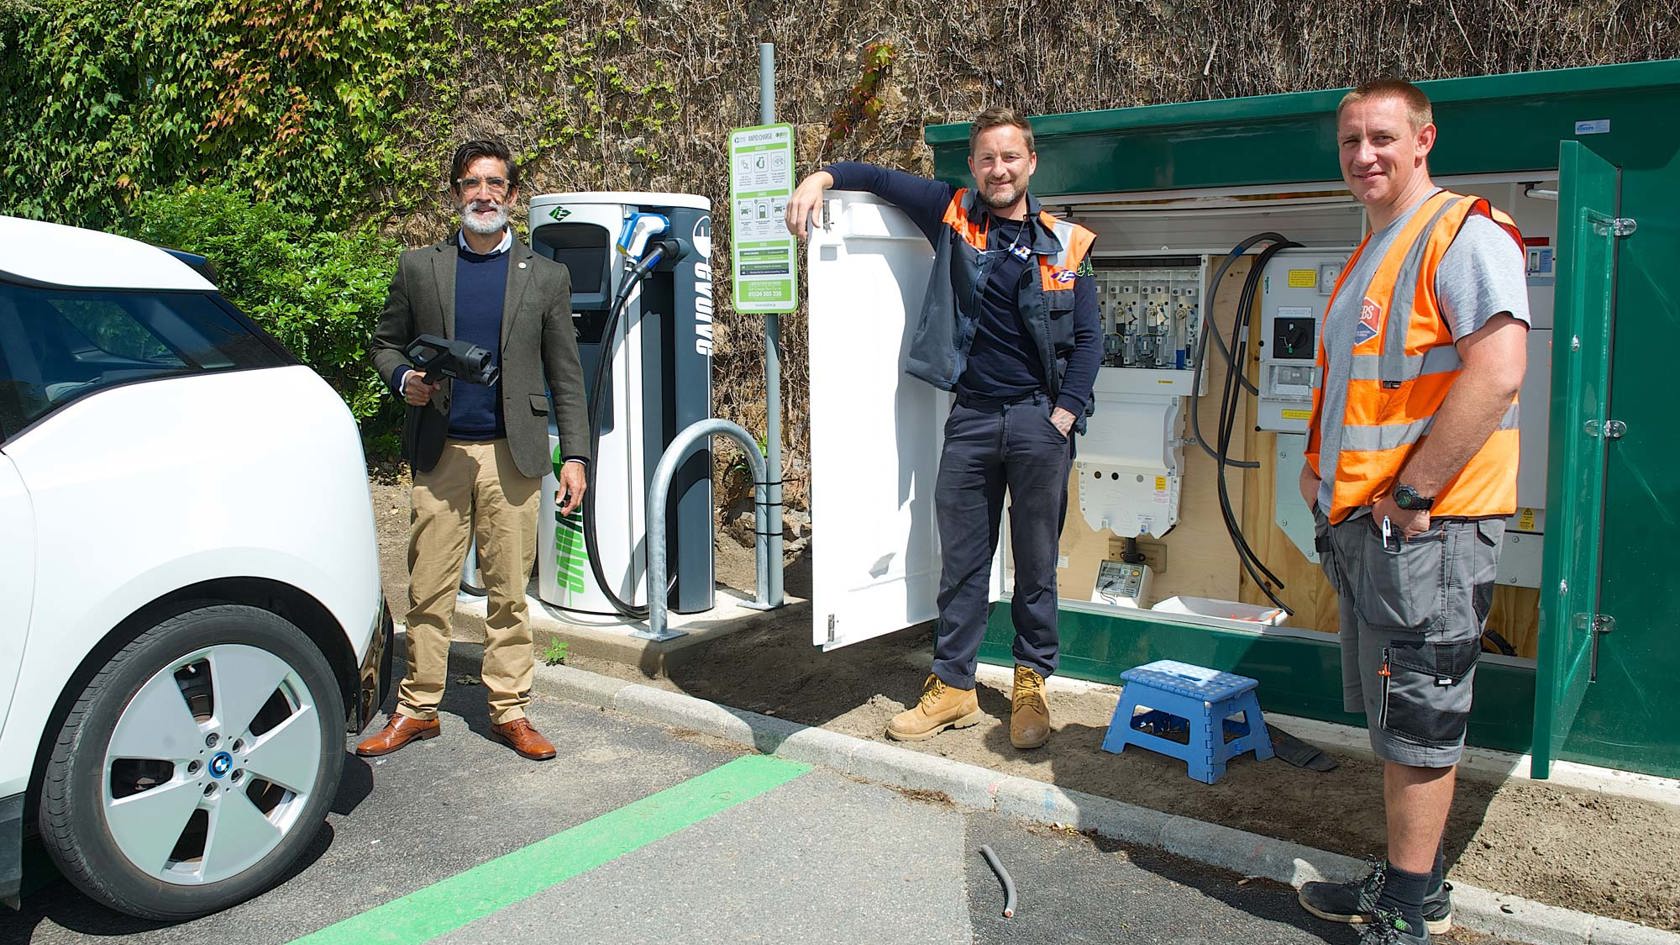 Team use new electric car charging points